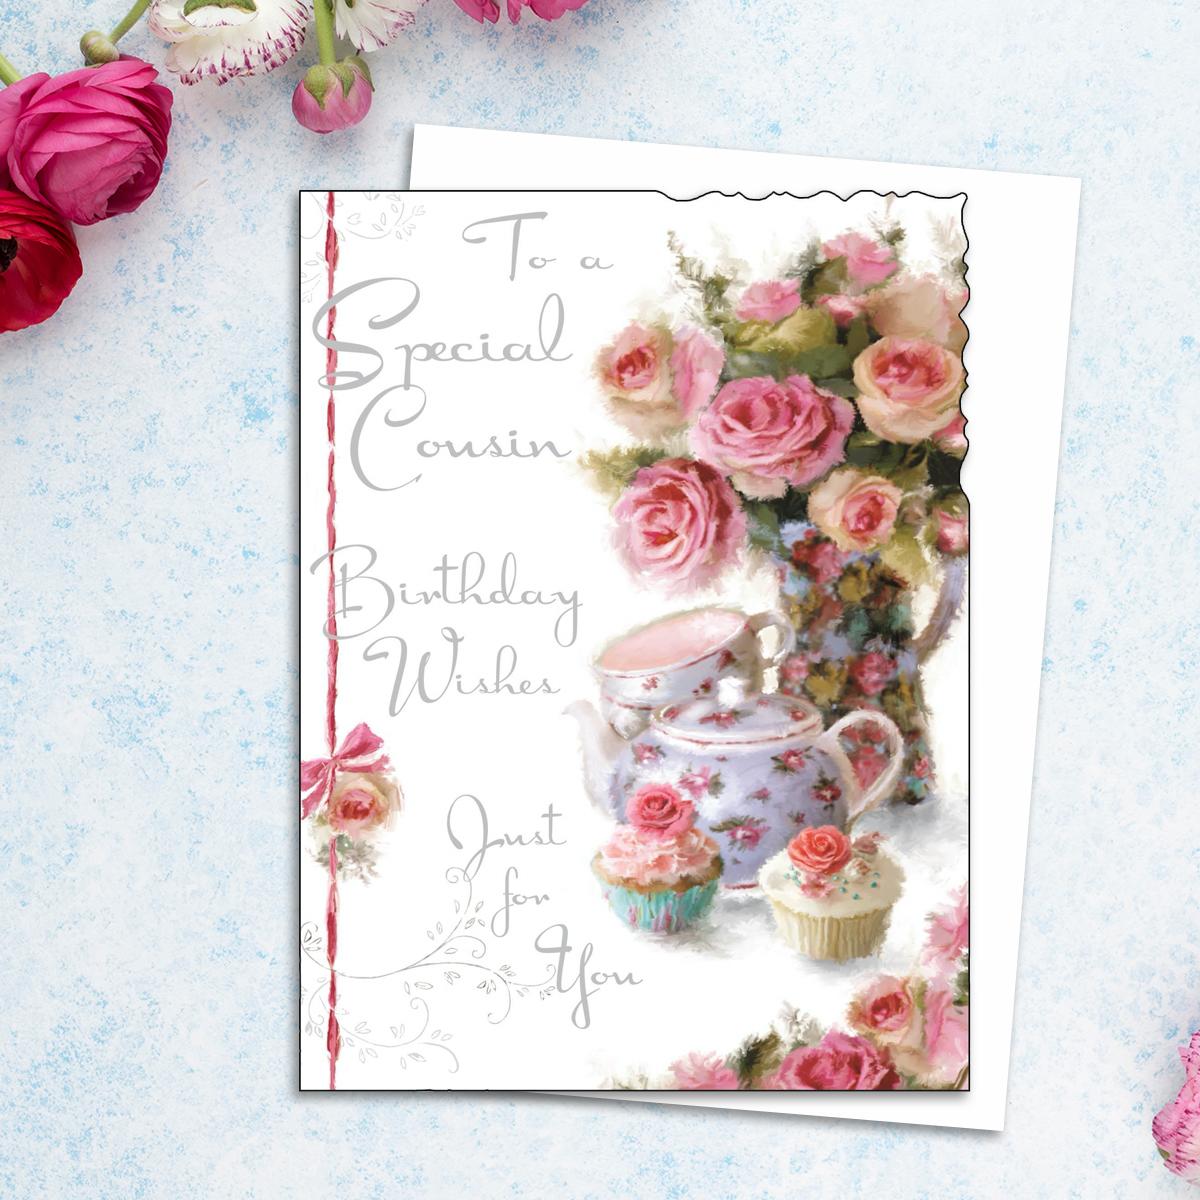 Special Cousin Teacup & Cakes Birthday Card – The Celebration Store